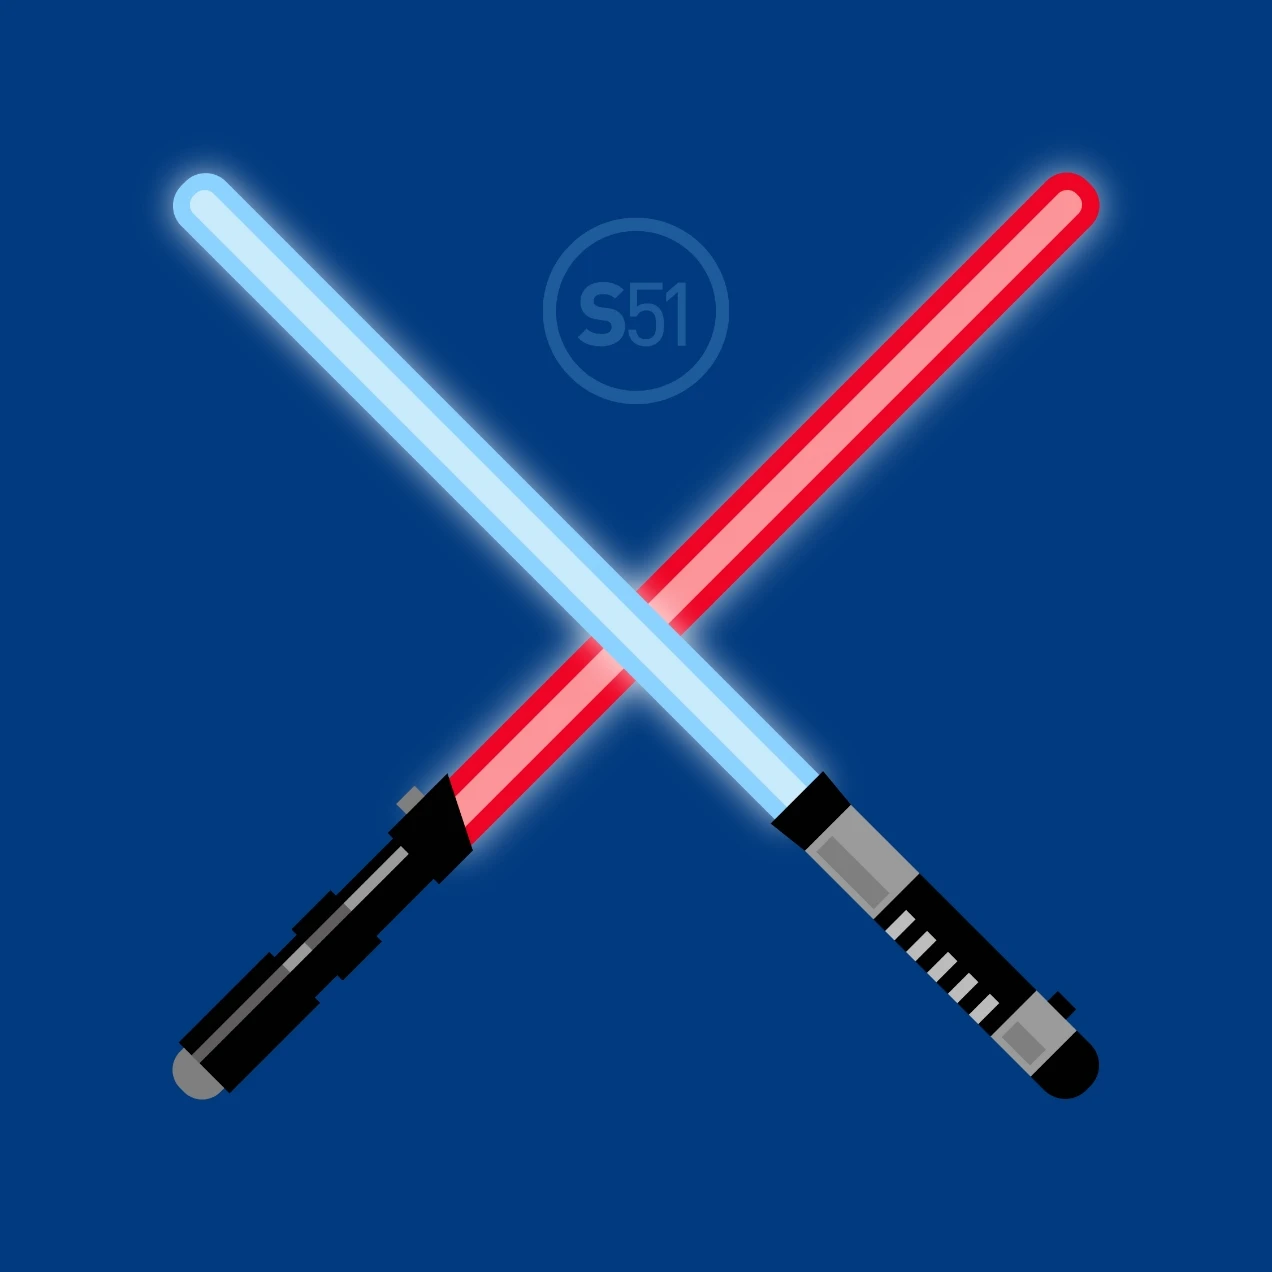 Two lightsabers on a blue background.